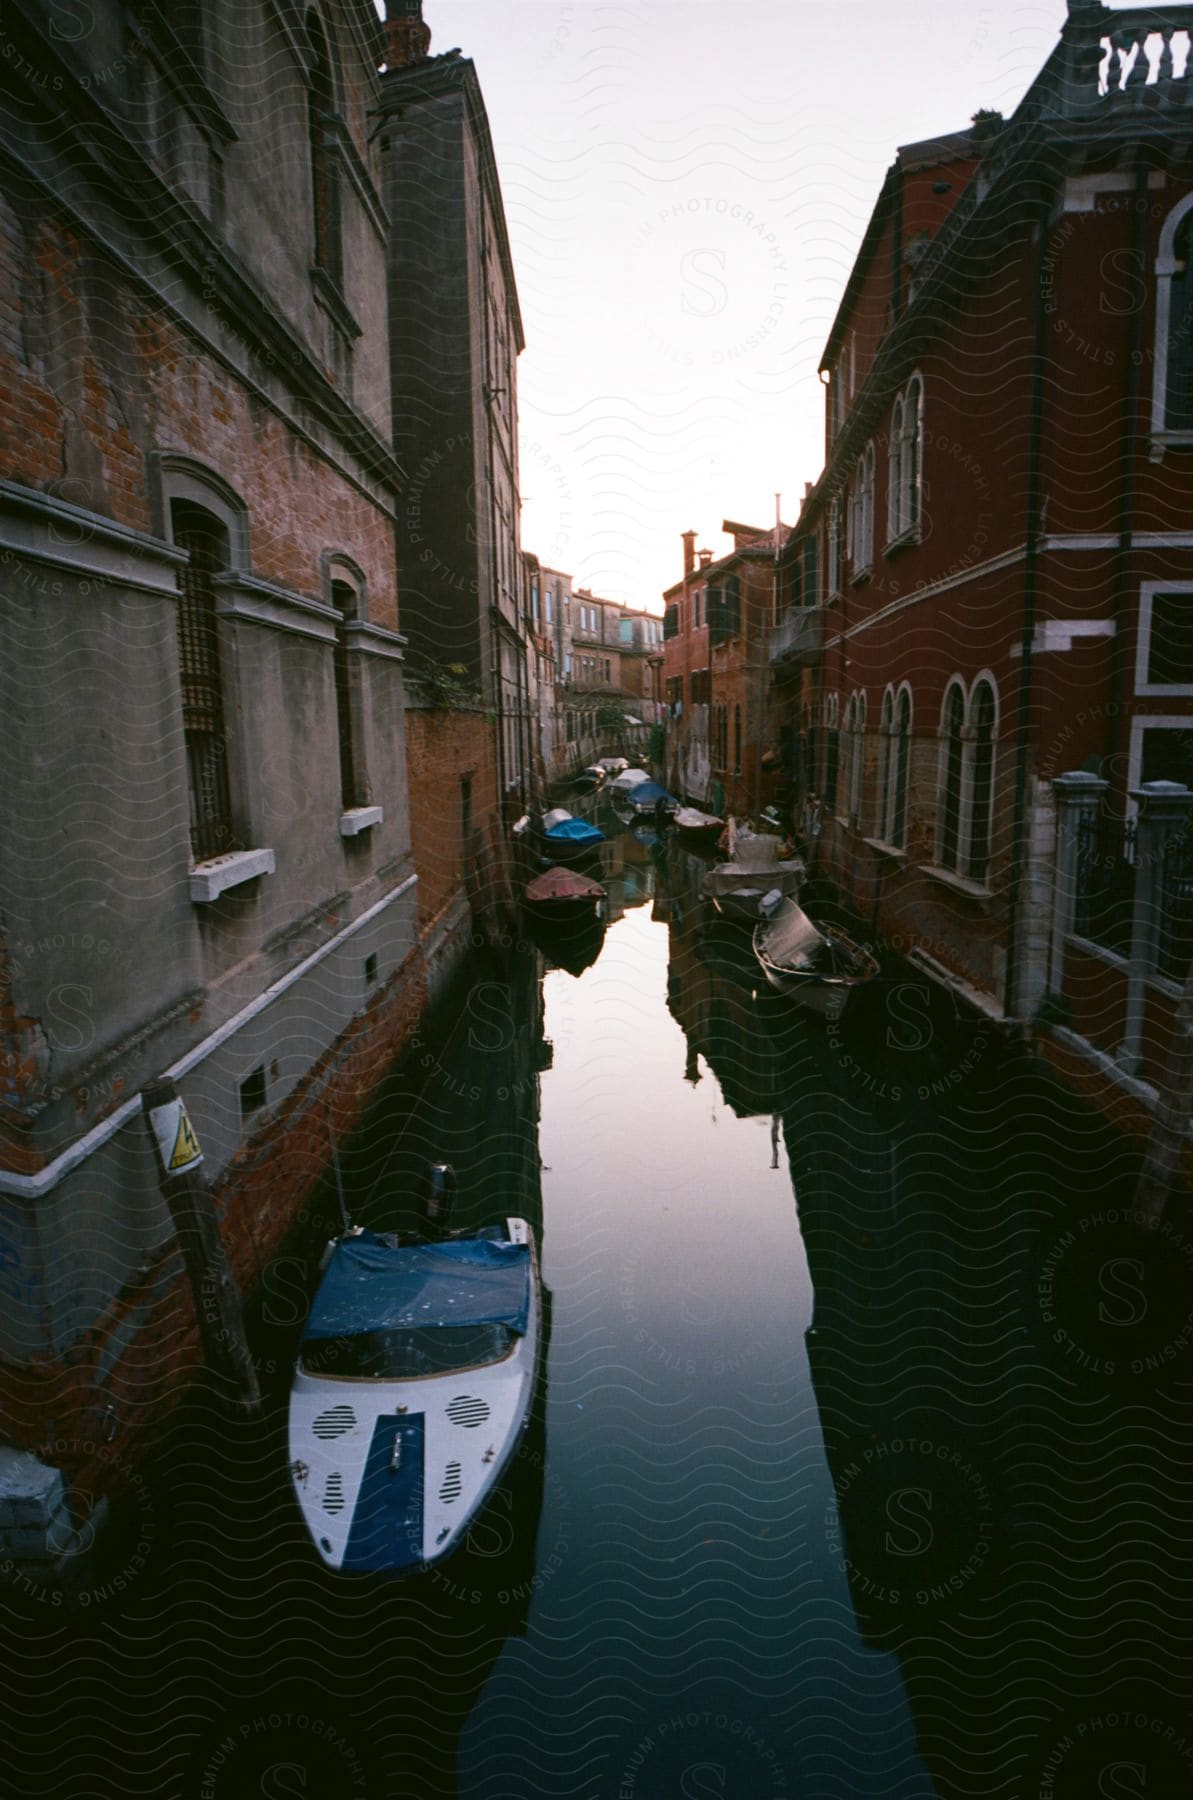 A tranquil canal is flanked by old, colorful buildings in the fading light of dusk, with boats gently moored along the sides.